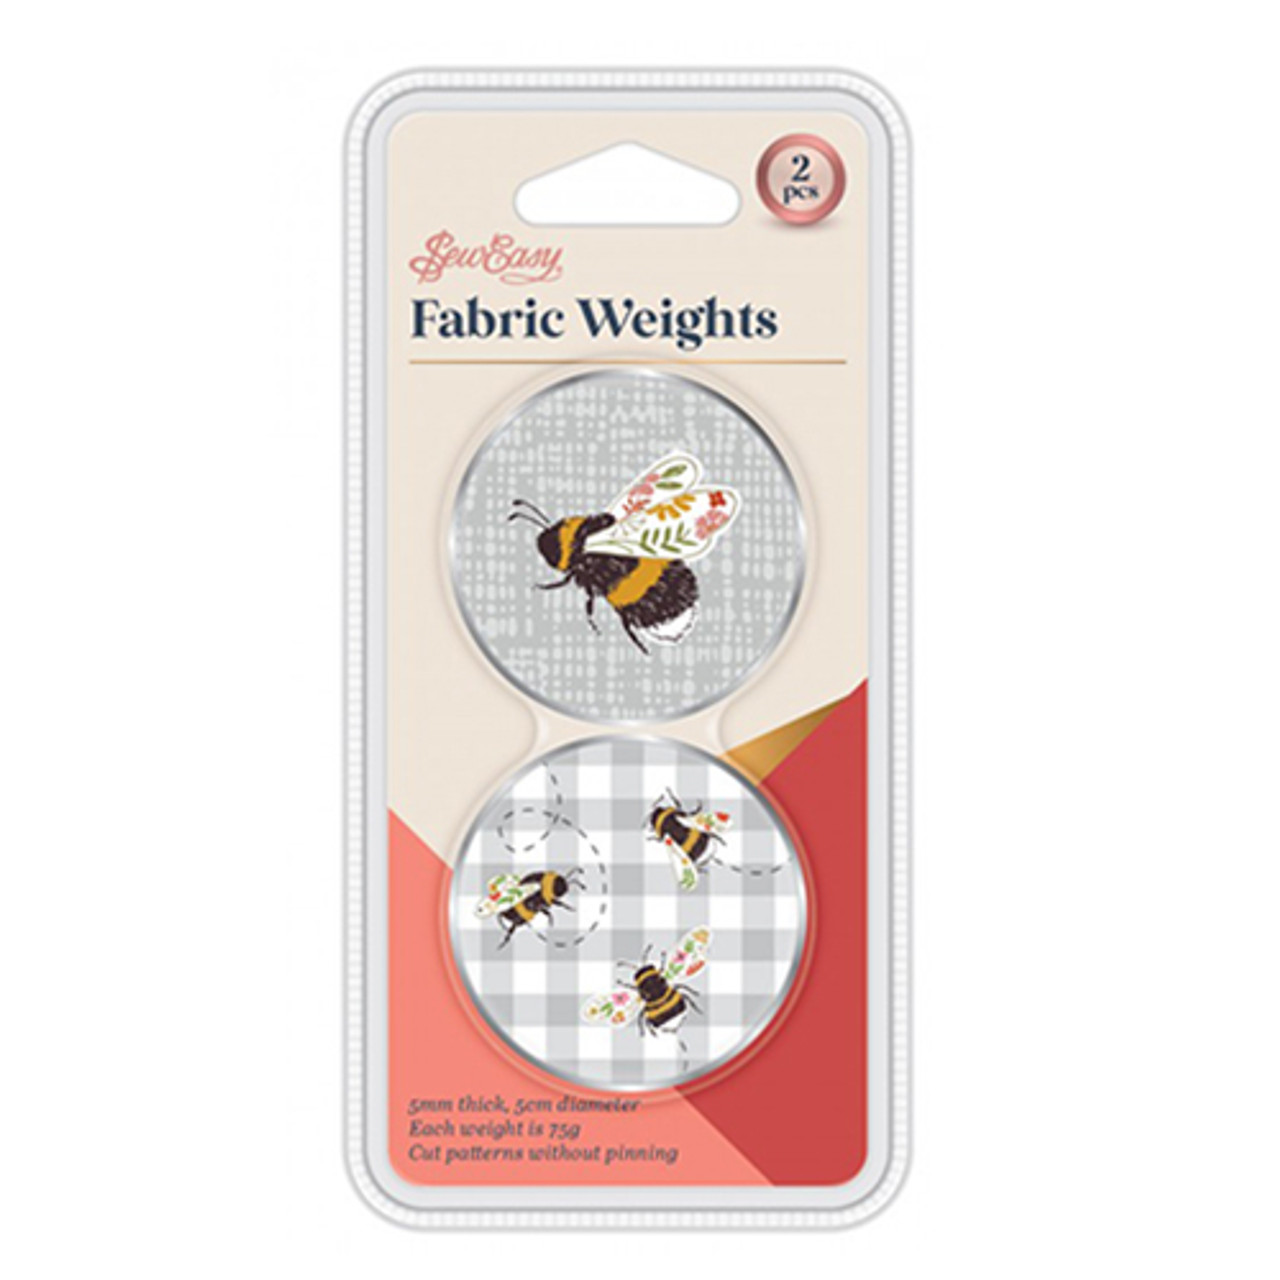 Sew Easy: Fabric Weights - Wellington Sewing Centre